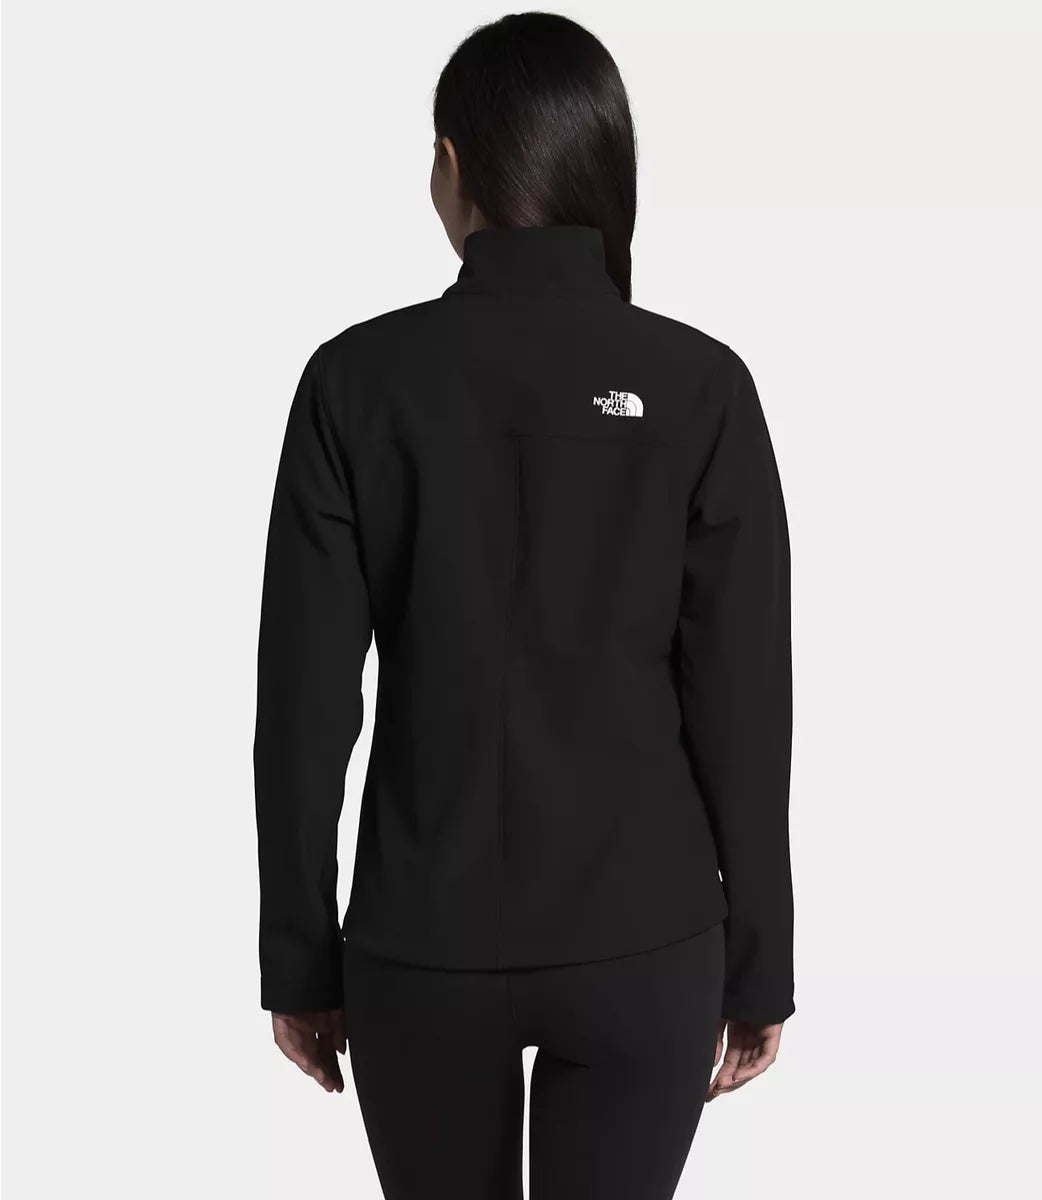 **USED** The North Face Women’s Apex Bionic Jacket